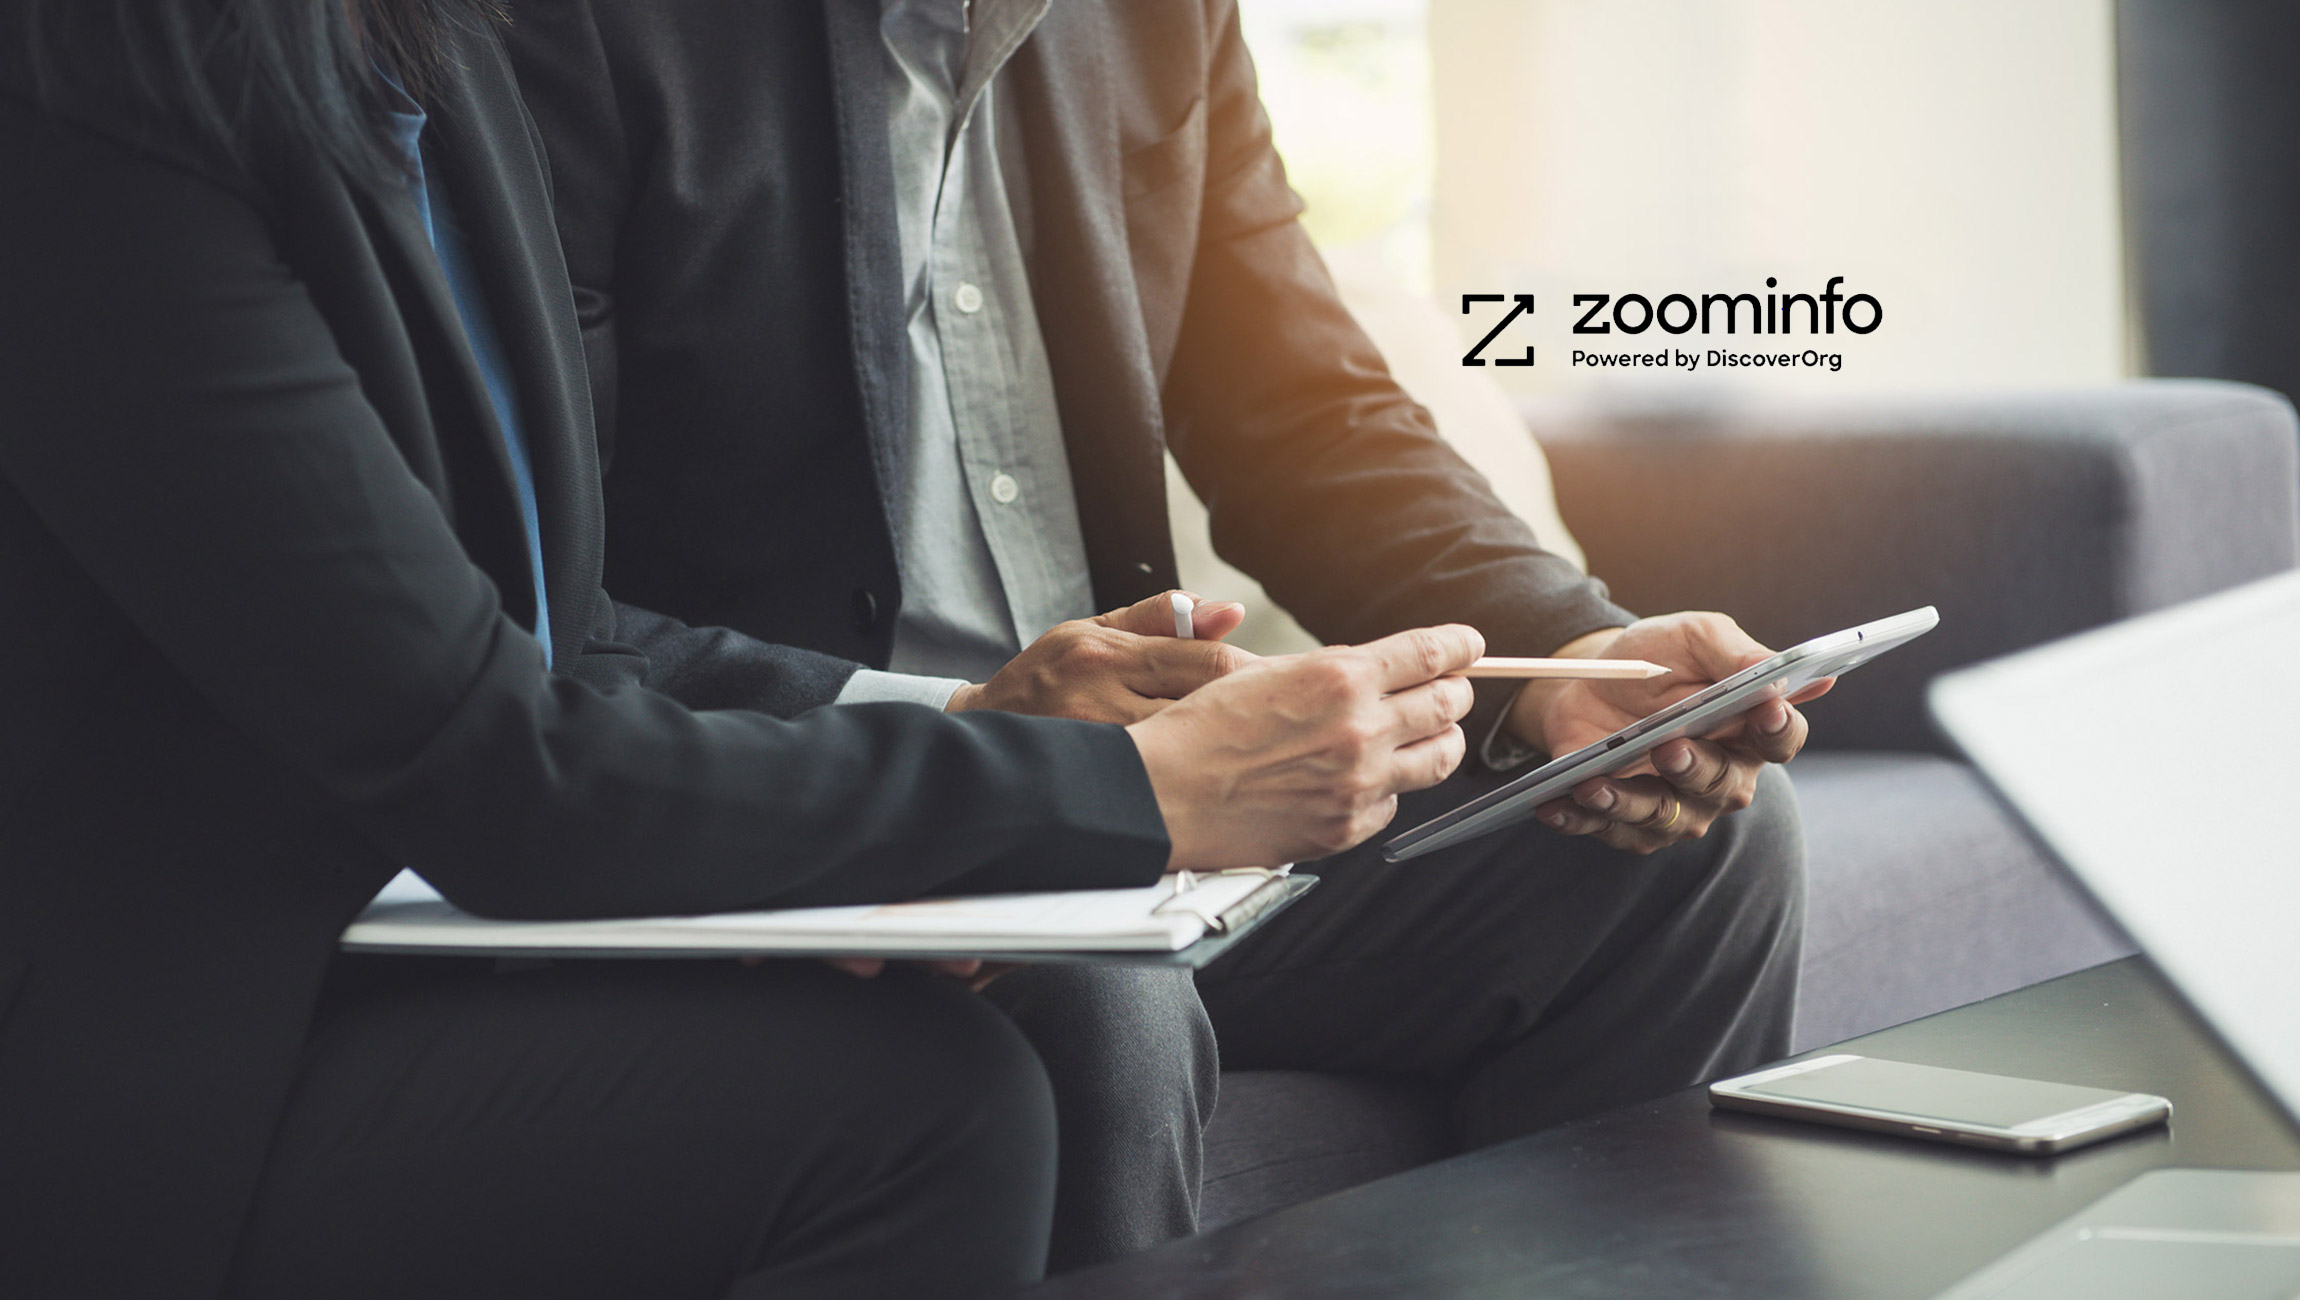 User Reviews Place ZoomInfo at the Top in G2’s Winter Sales & Marketing Intelligence Reports